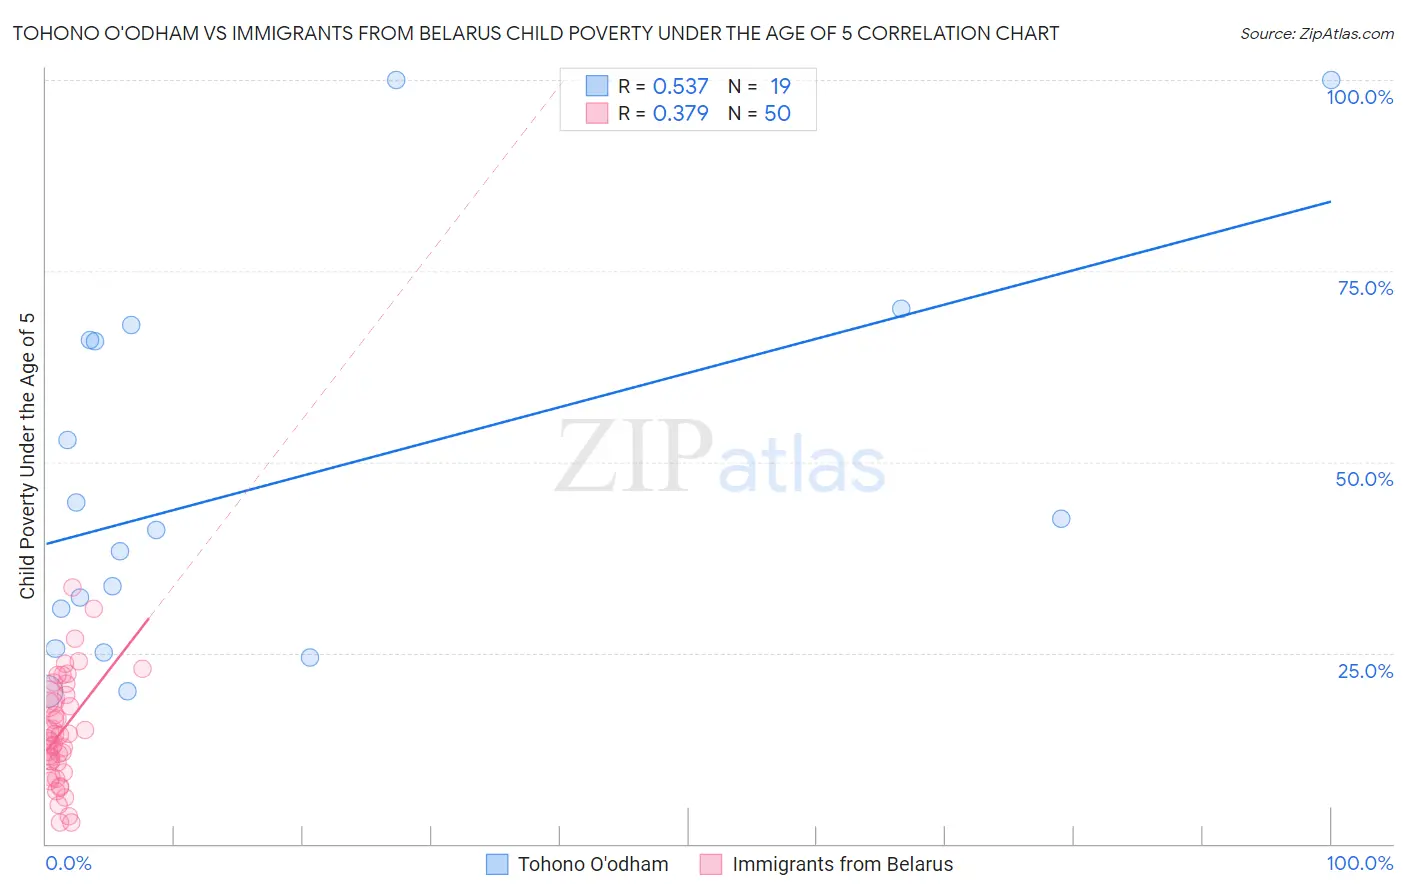 Tohono O'odham vs Immigrants from Belarus Child Poverty Under the Age of 5